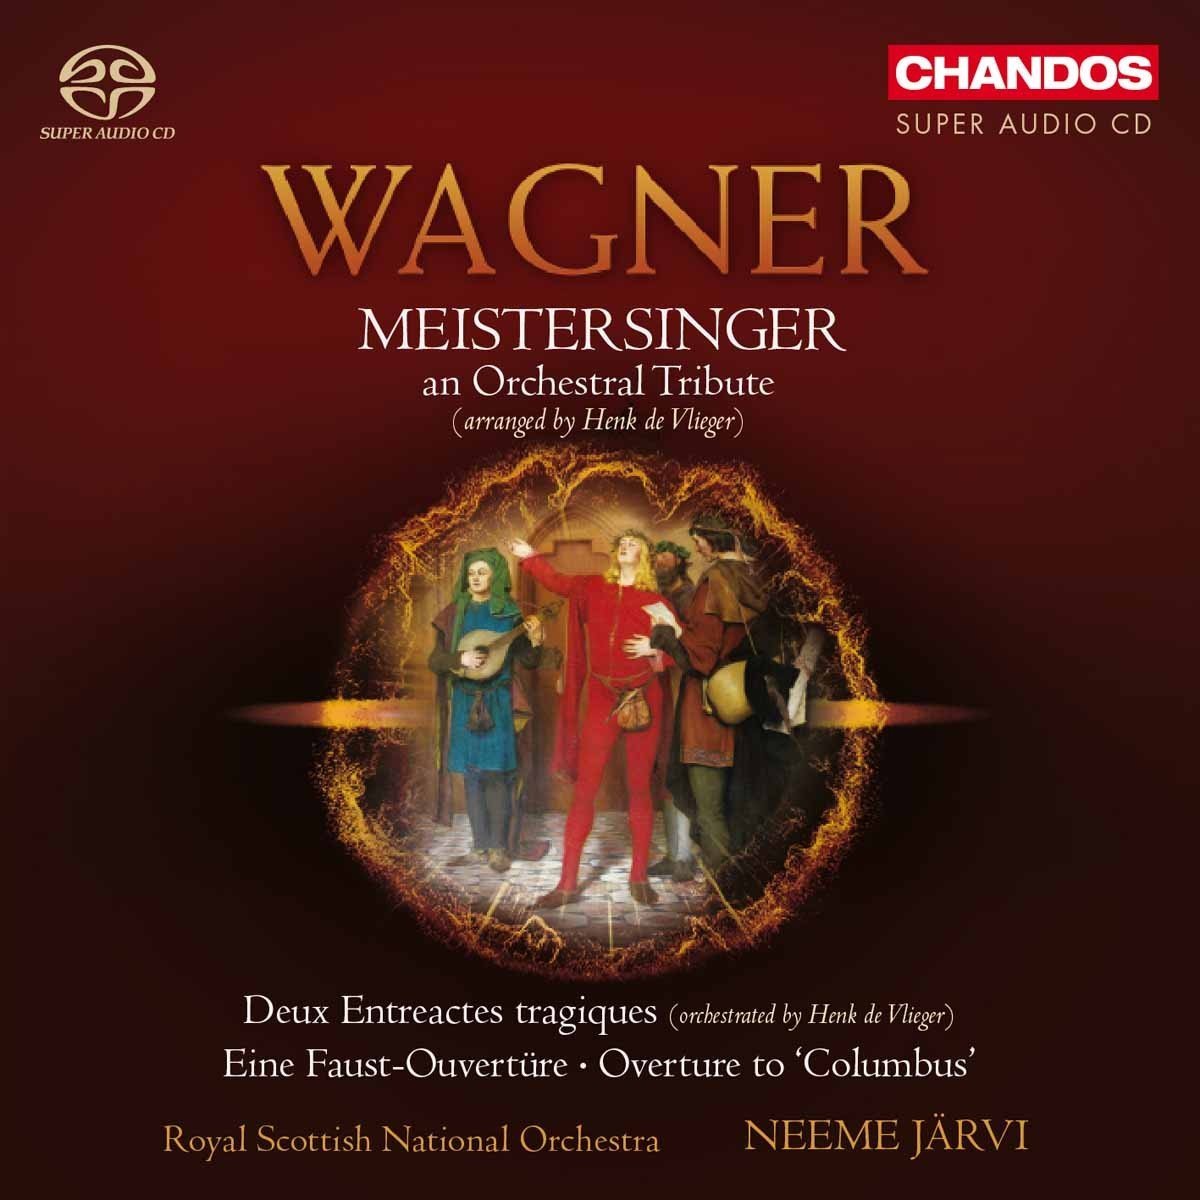 Royal Scottish National Orchestra, Neeme Jarvi – Wagner: Meistersinger, an Orchestral Tribute (2011) [theClassicalShop FLAC 24bit/96kHz]